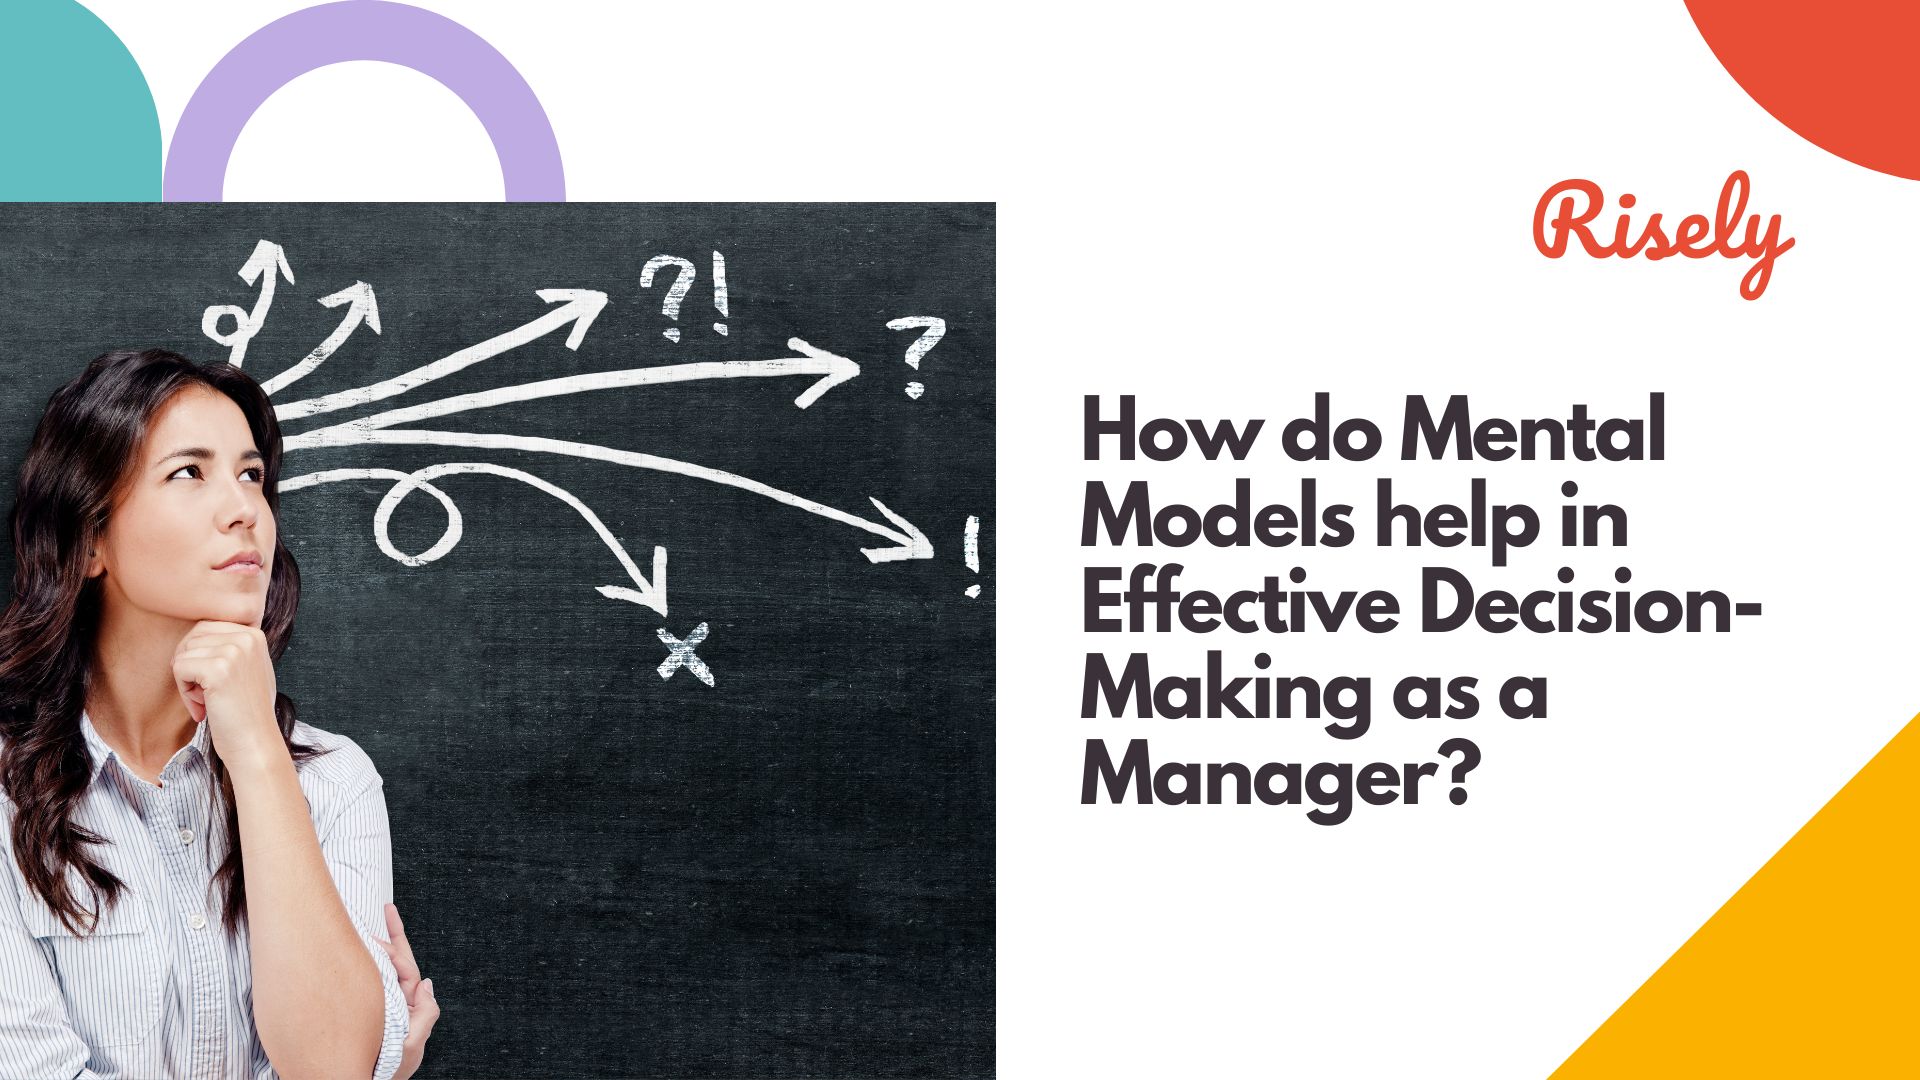 How do Mental Models help in Effective Decision-Making as a Manager?